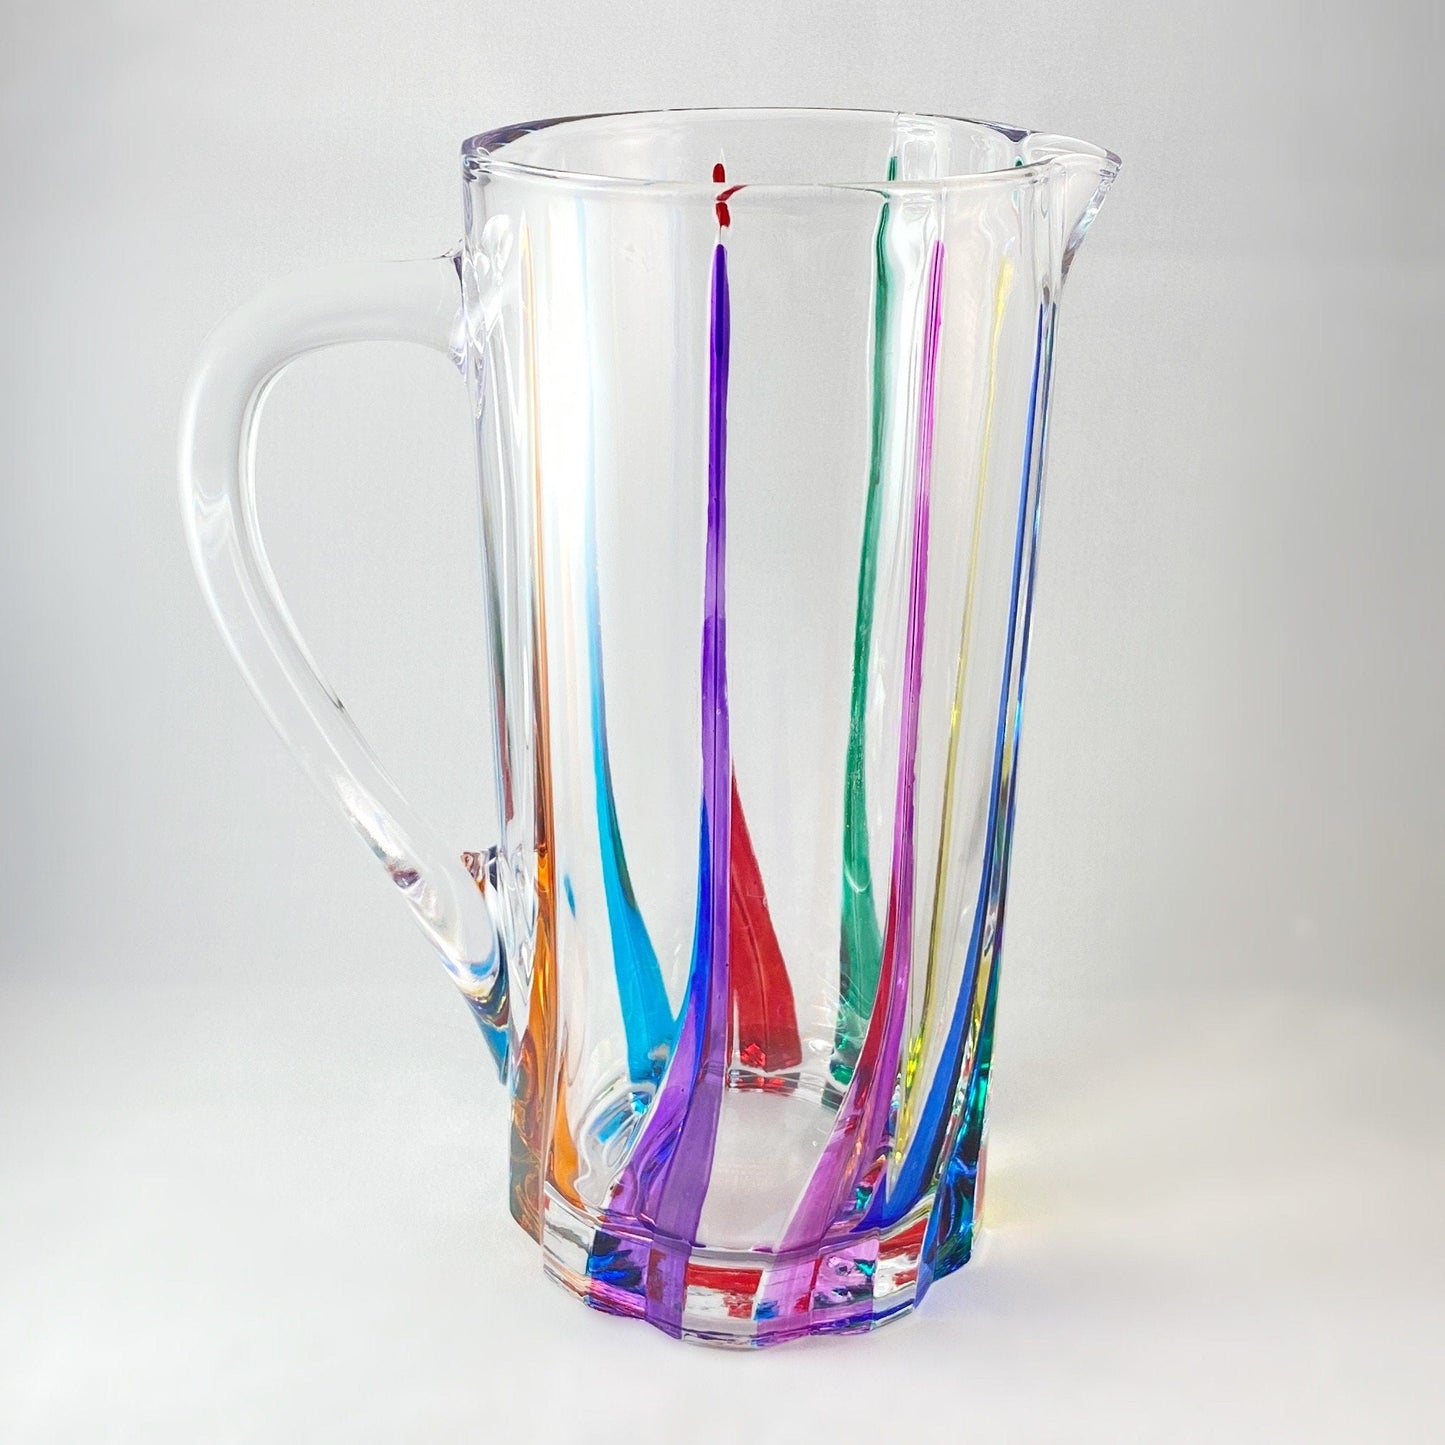 Venetian Glass Trix Pitcher - Handmade in Italy, Colorful Murano Glass Pitcher